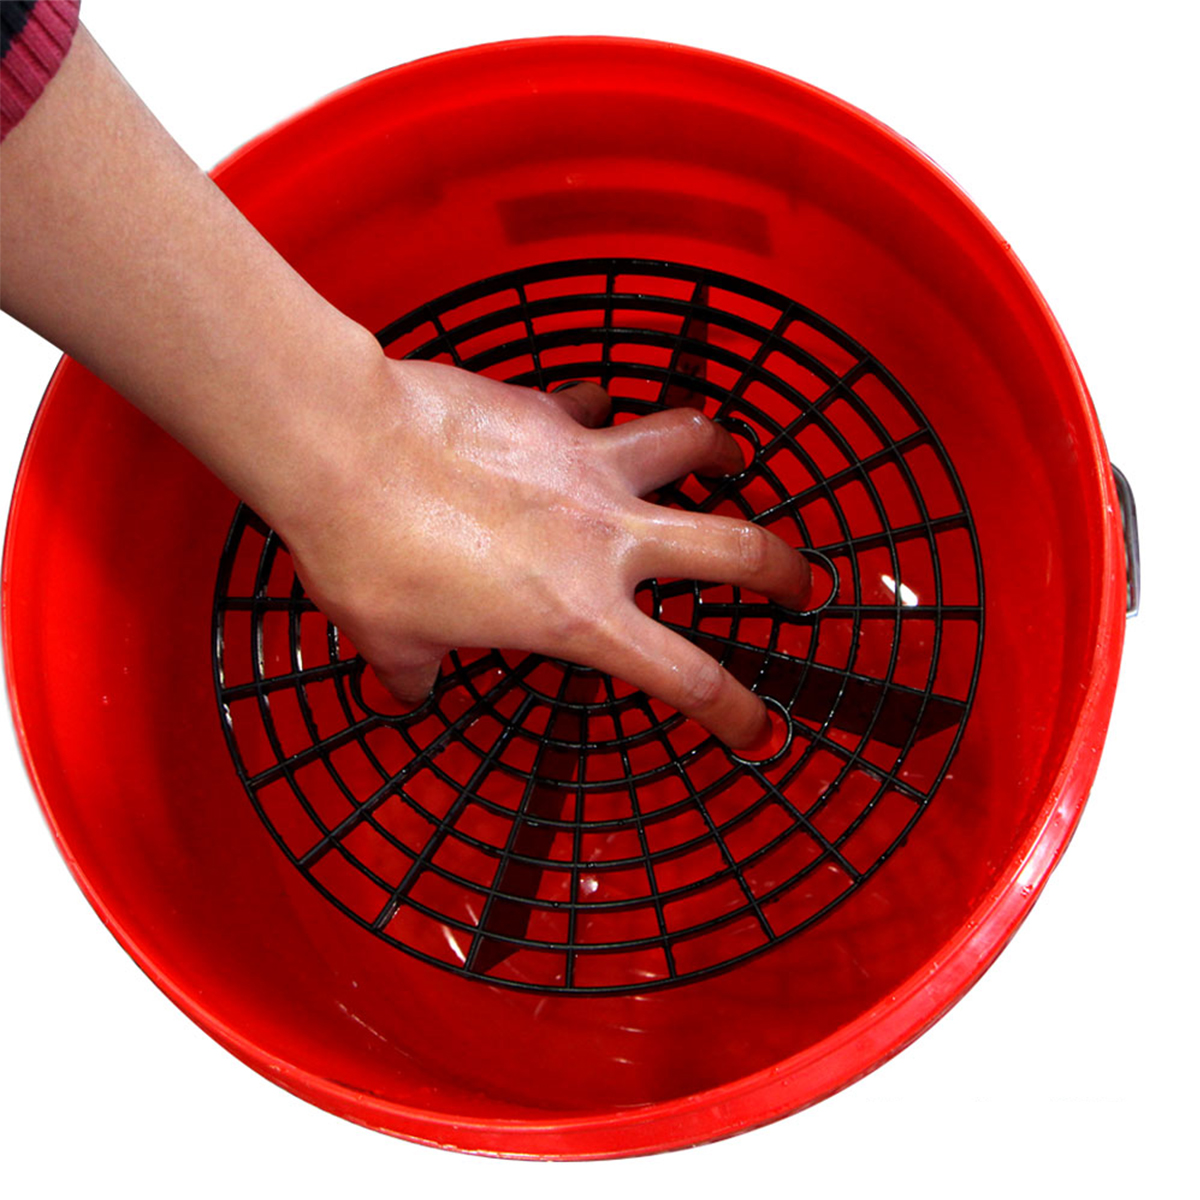 Plastic-Car-Wash-Grit-Guard-Insert-Washboard-Water-Bucket-Filter-Scratch-Dirt-Preventing-Tool-1400776